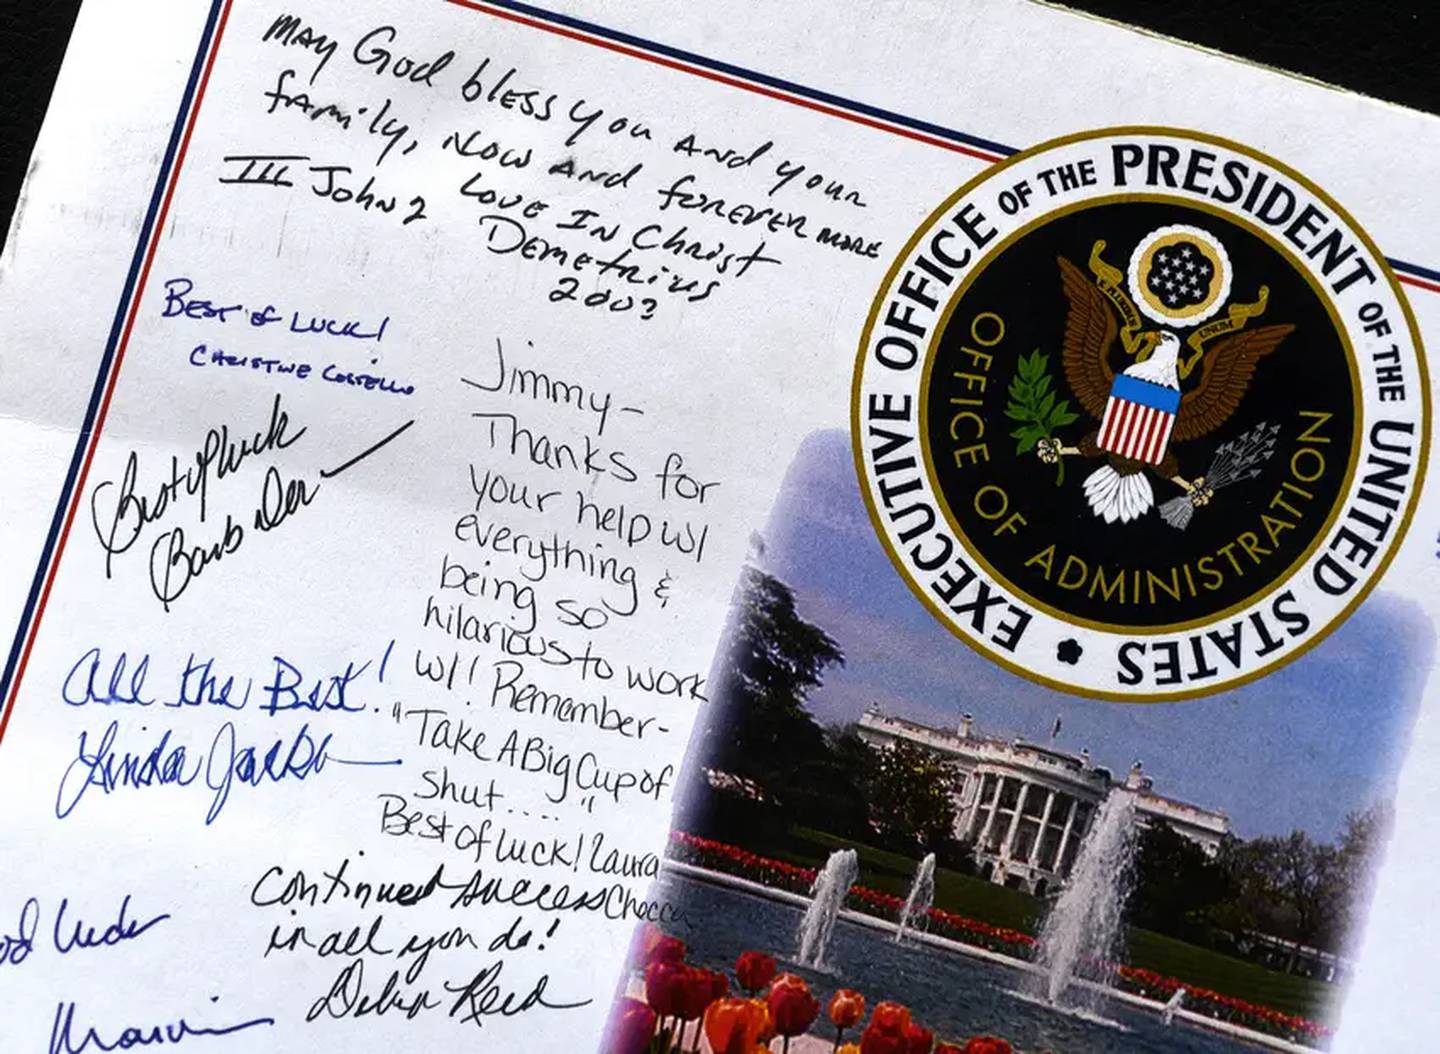 Notes of appreciation for Jim Peckey from his time working at the White House. He keeps mementos in his Abilene home.